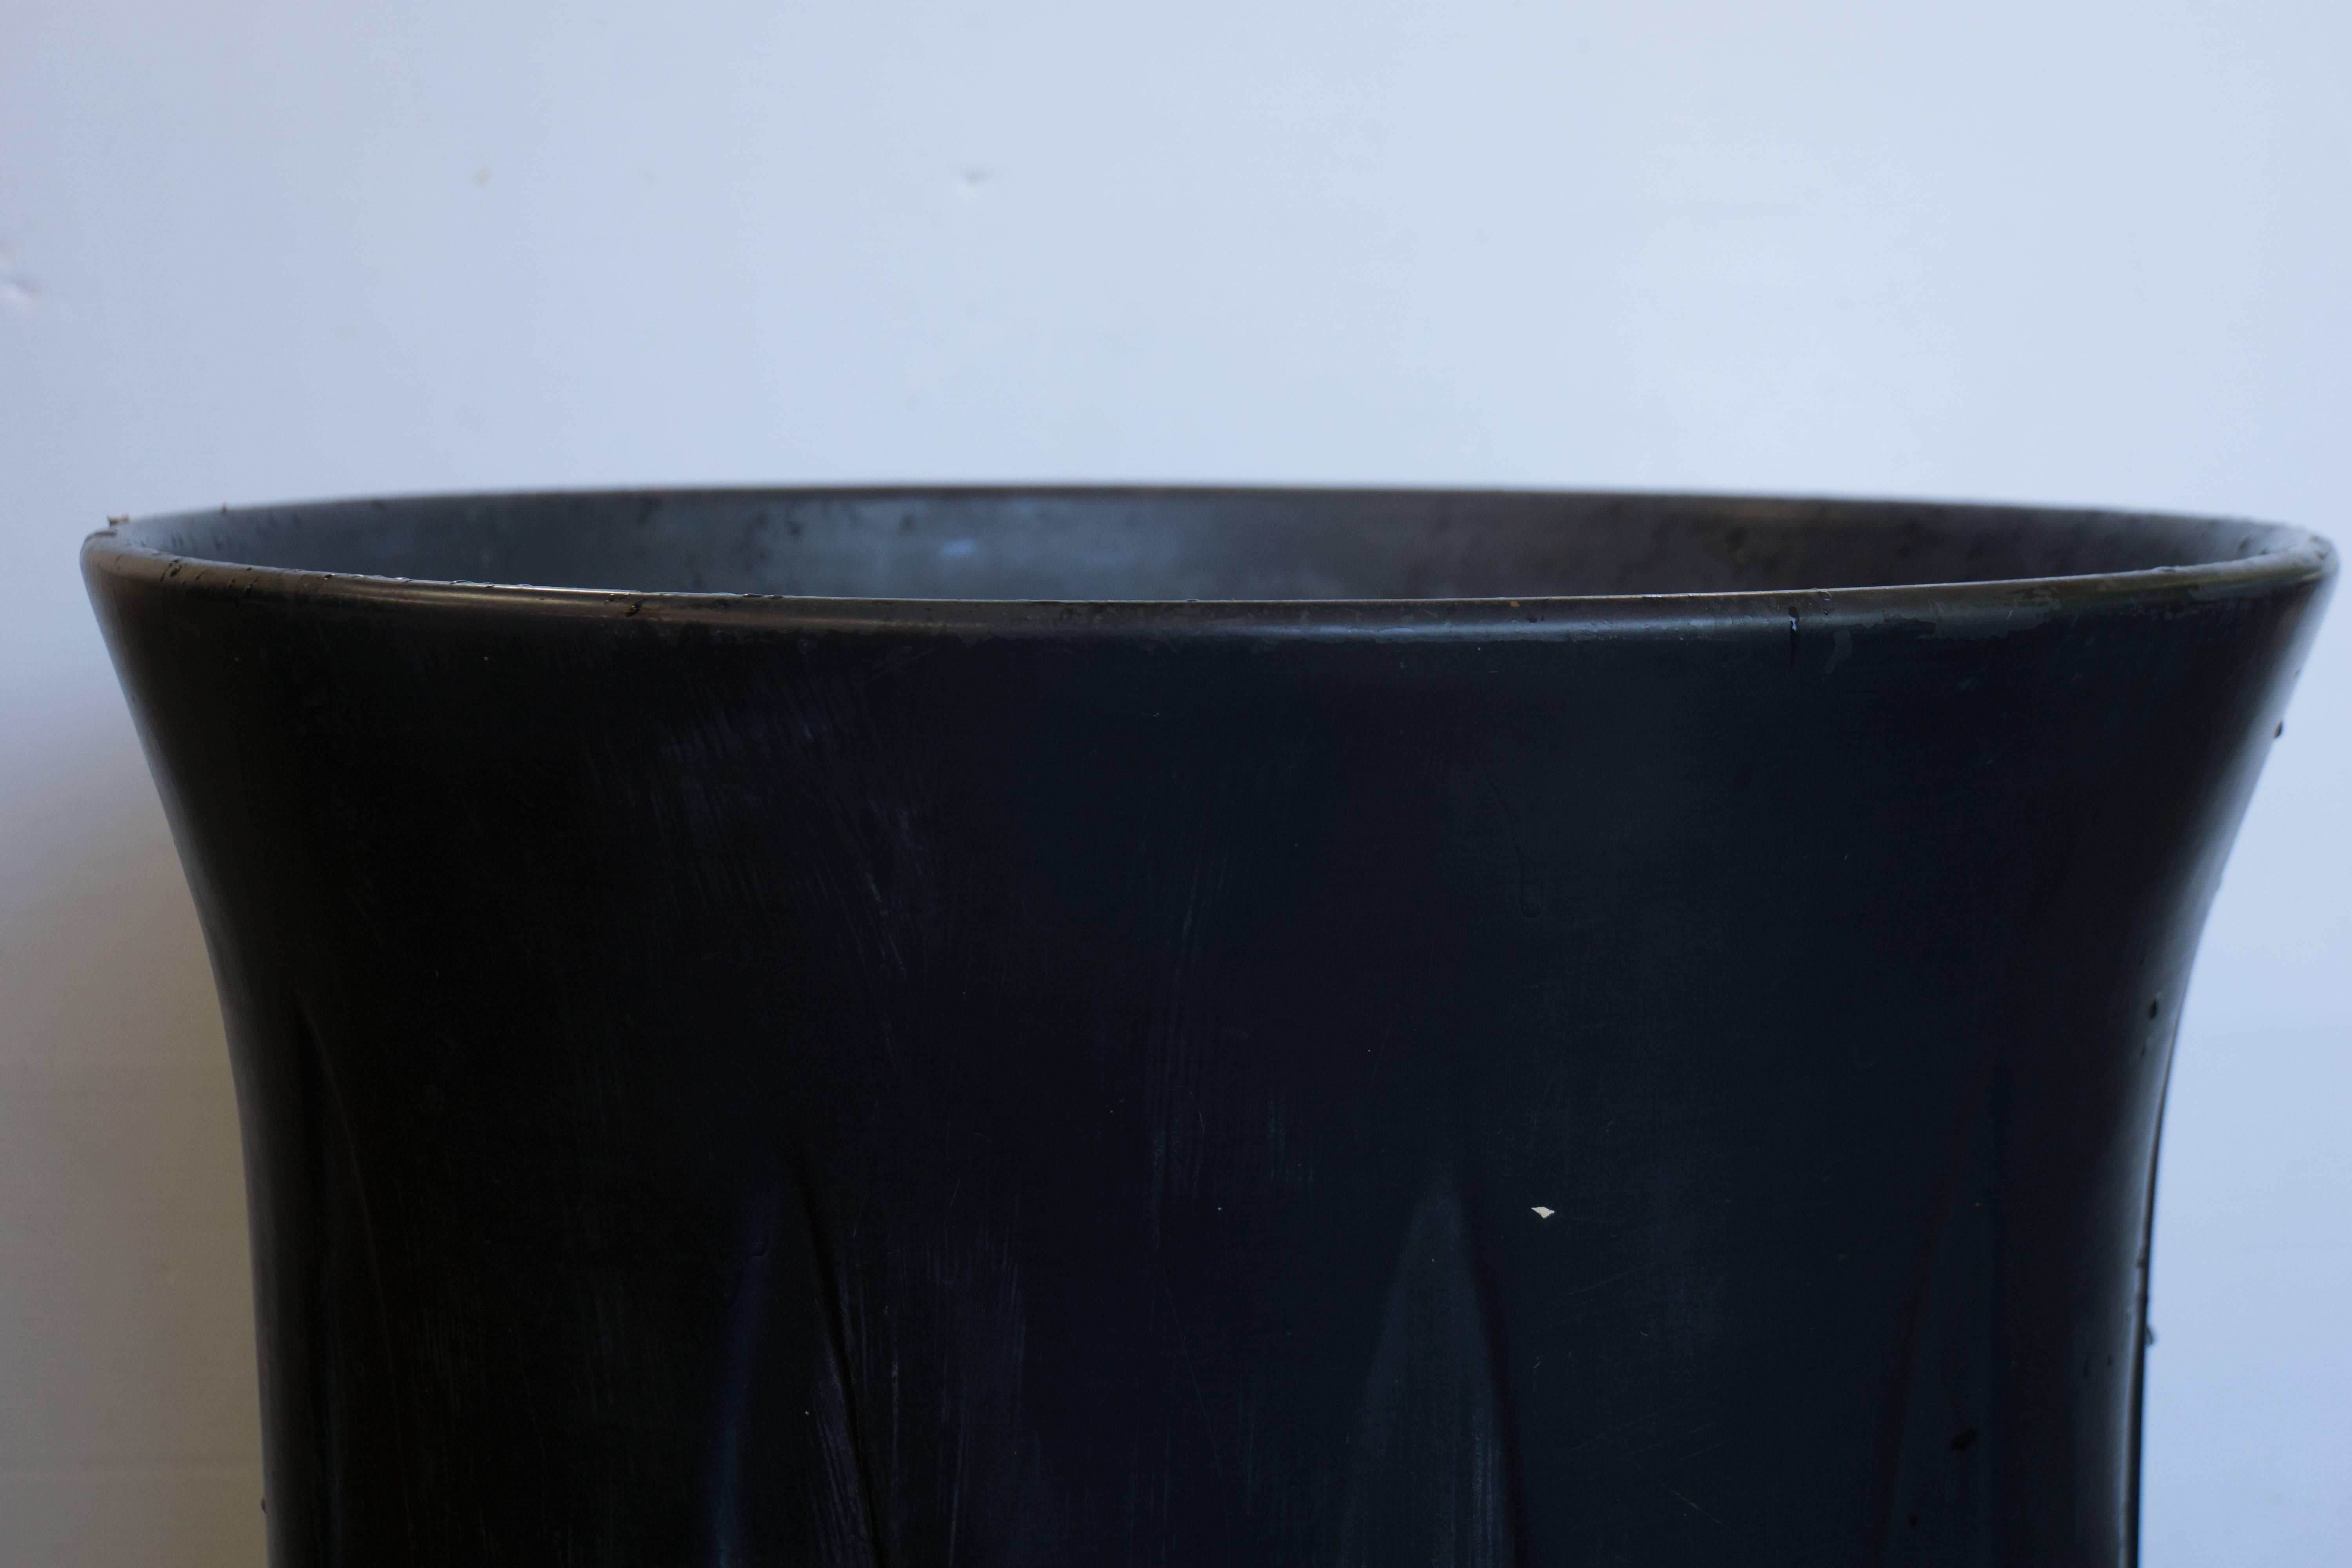 Mid-Century Modern American large black gainey with inverted lotus design
Measures: 22.5